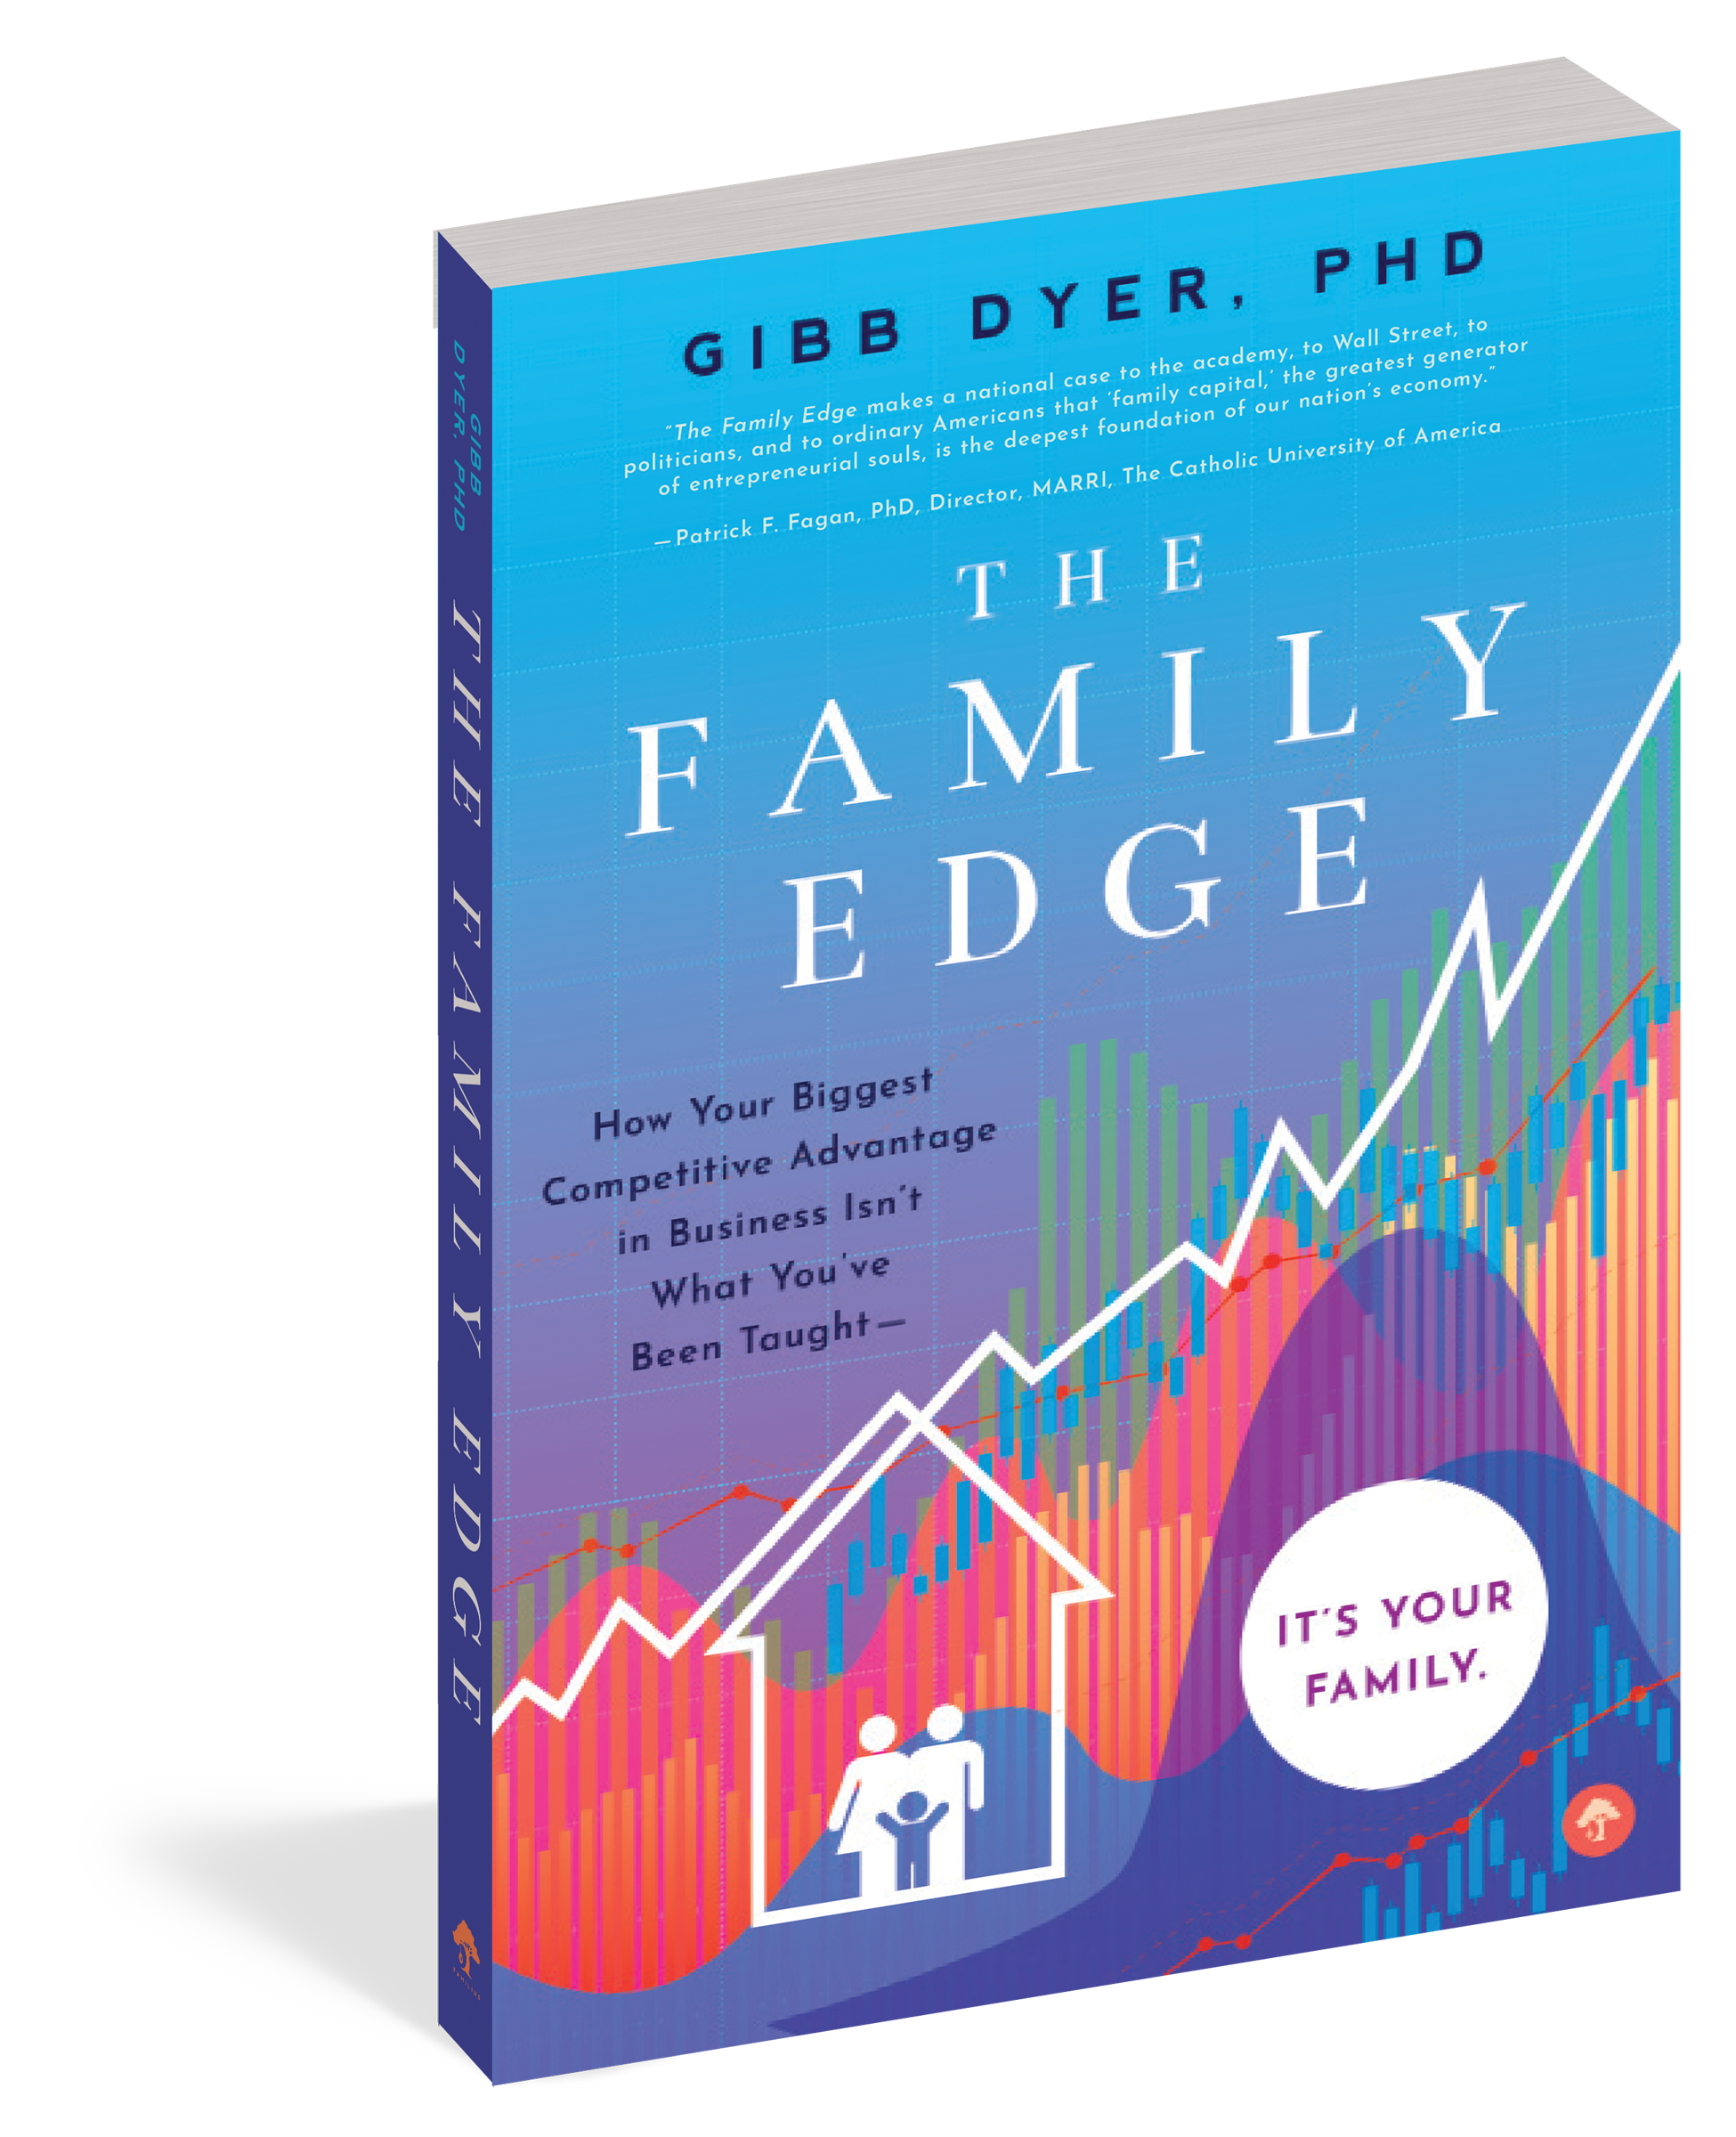 The cover of the book The Family Edge.